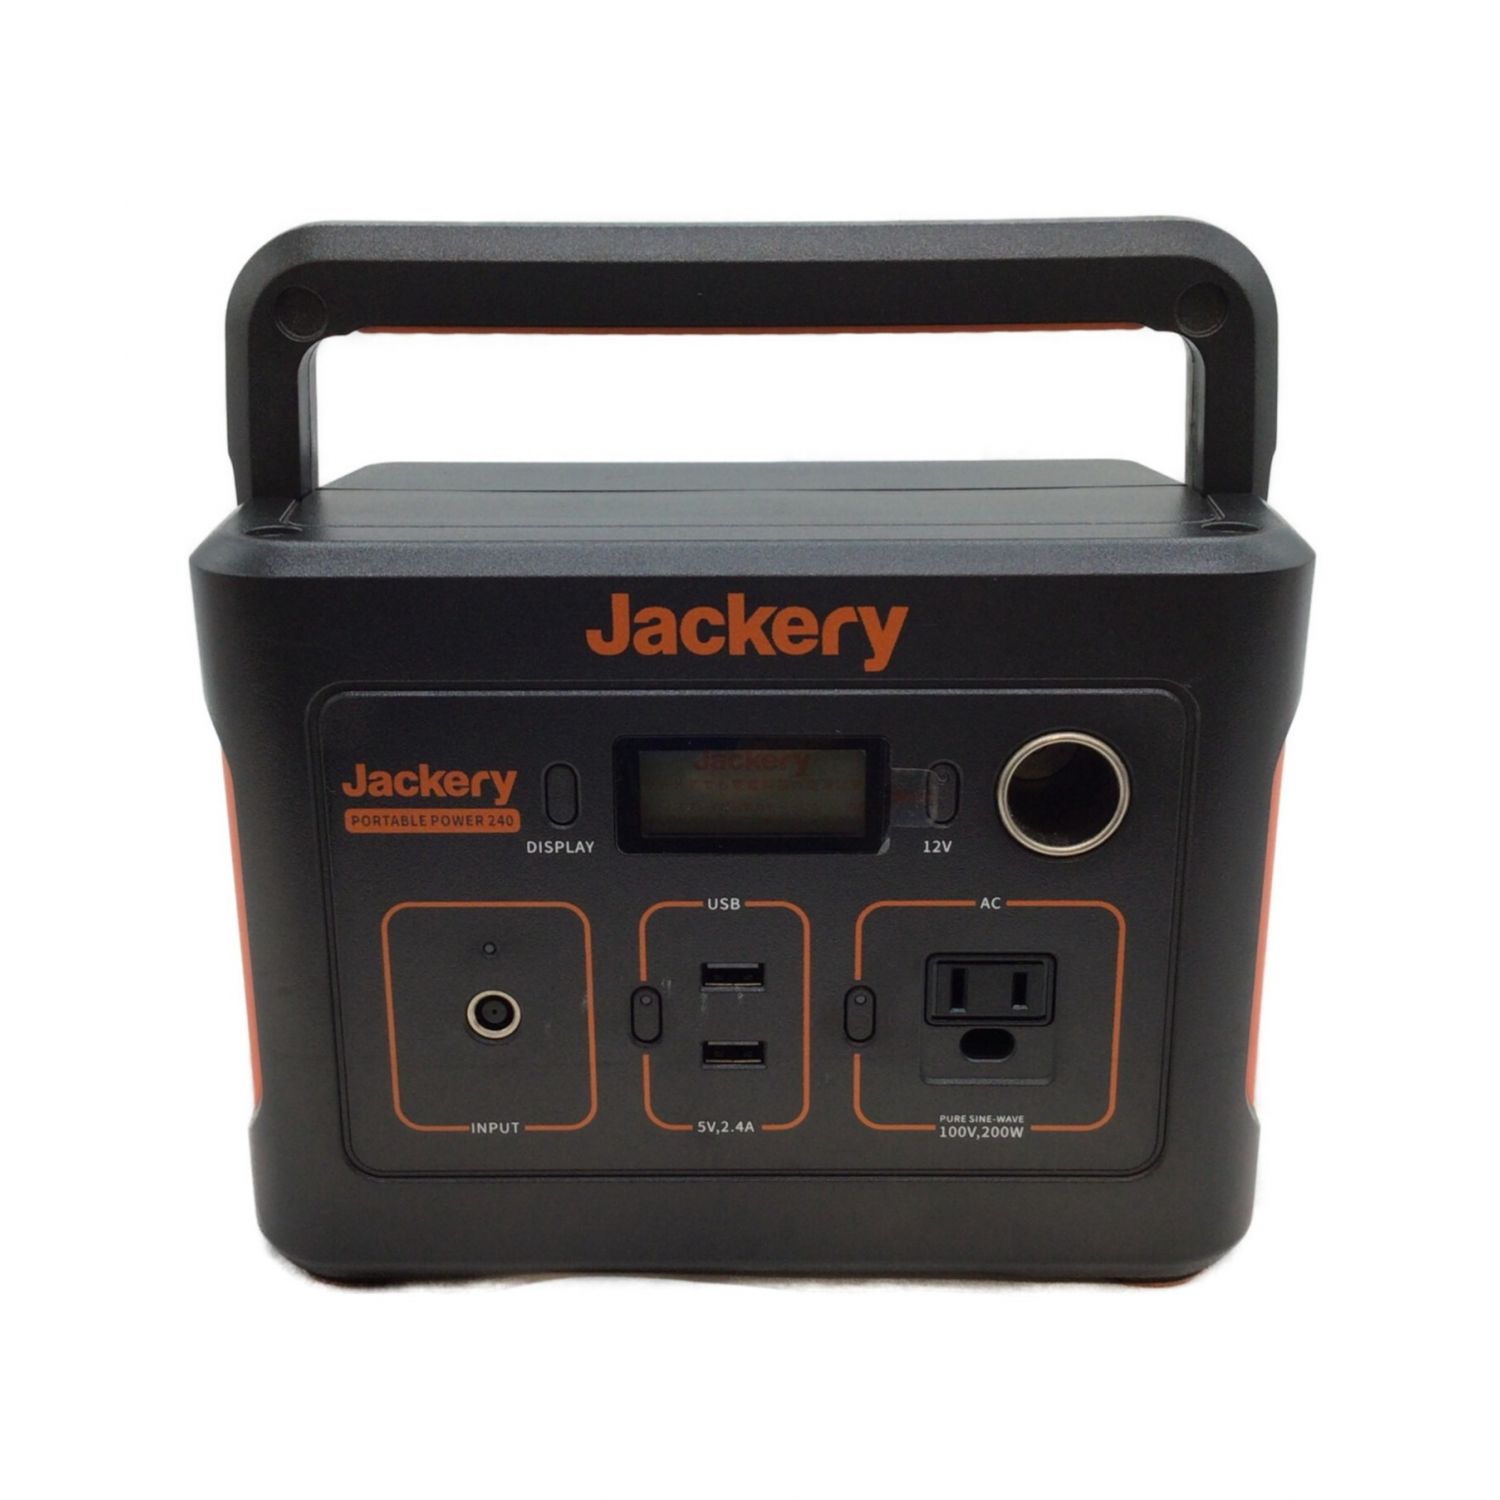 Jackly ポータブル電源240 67200mAh/240Wh｜トレファクONLINE